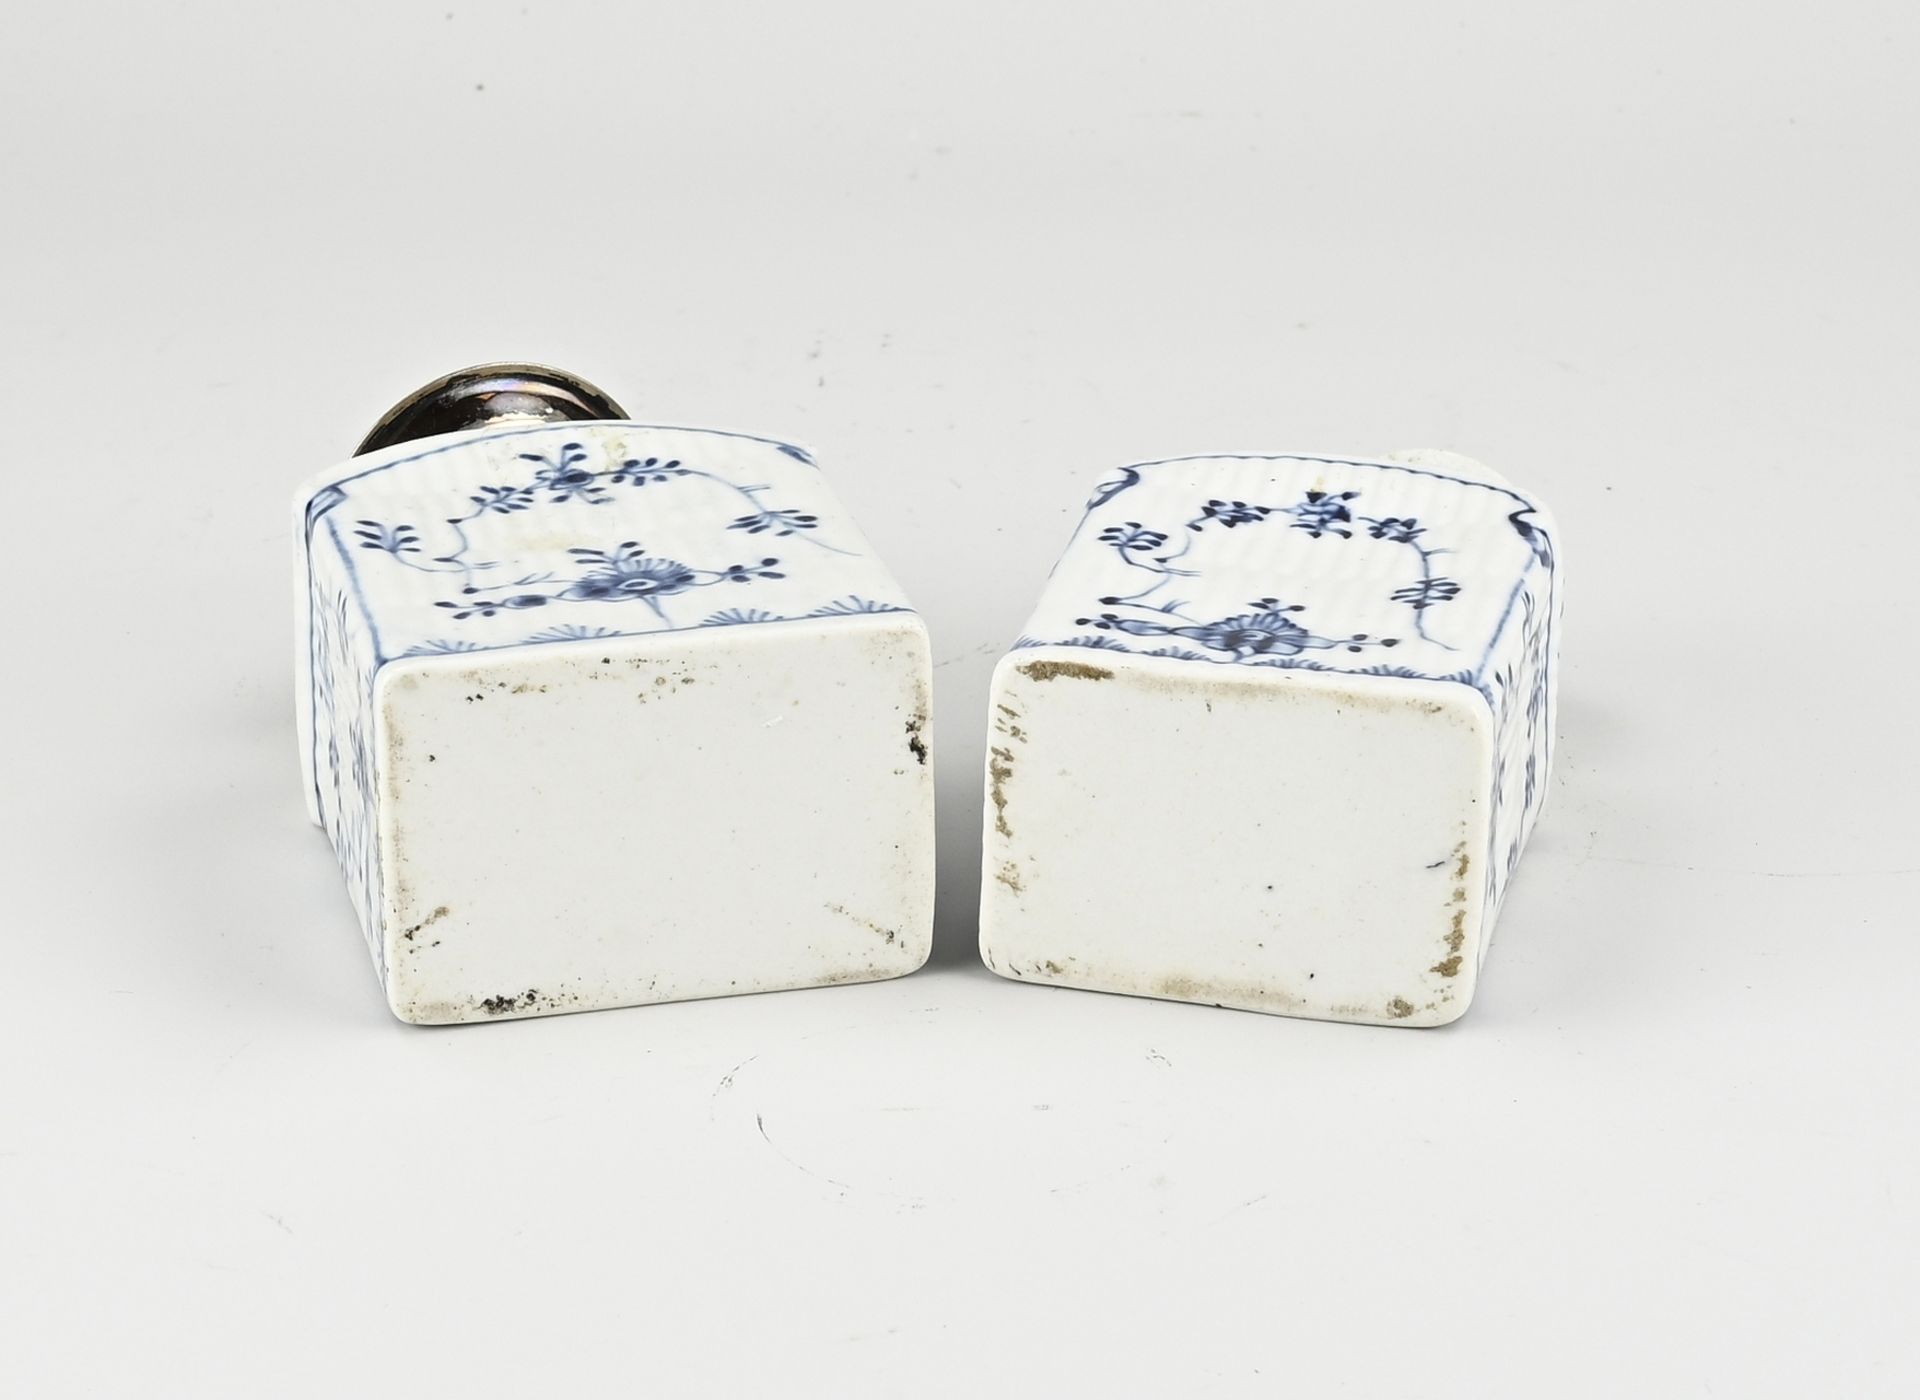 Two German tea canisters, H 14 - 15 cm. - Image 2 of 2